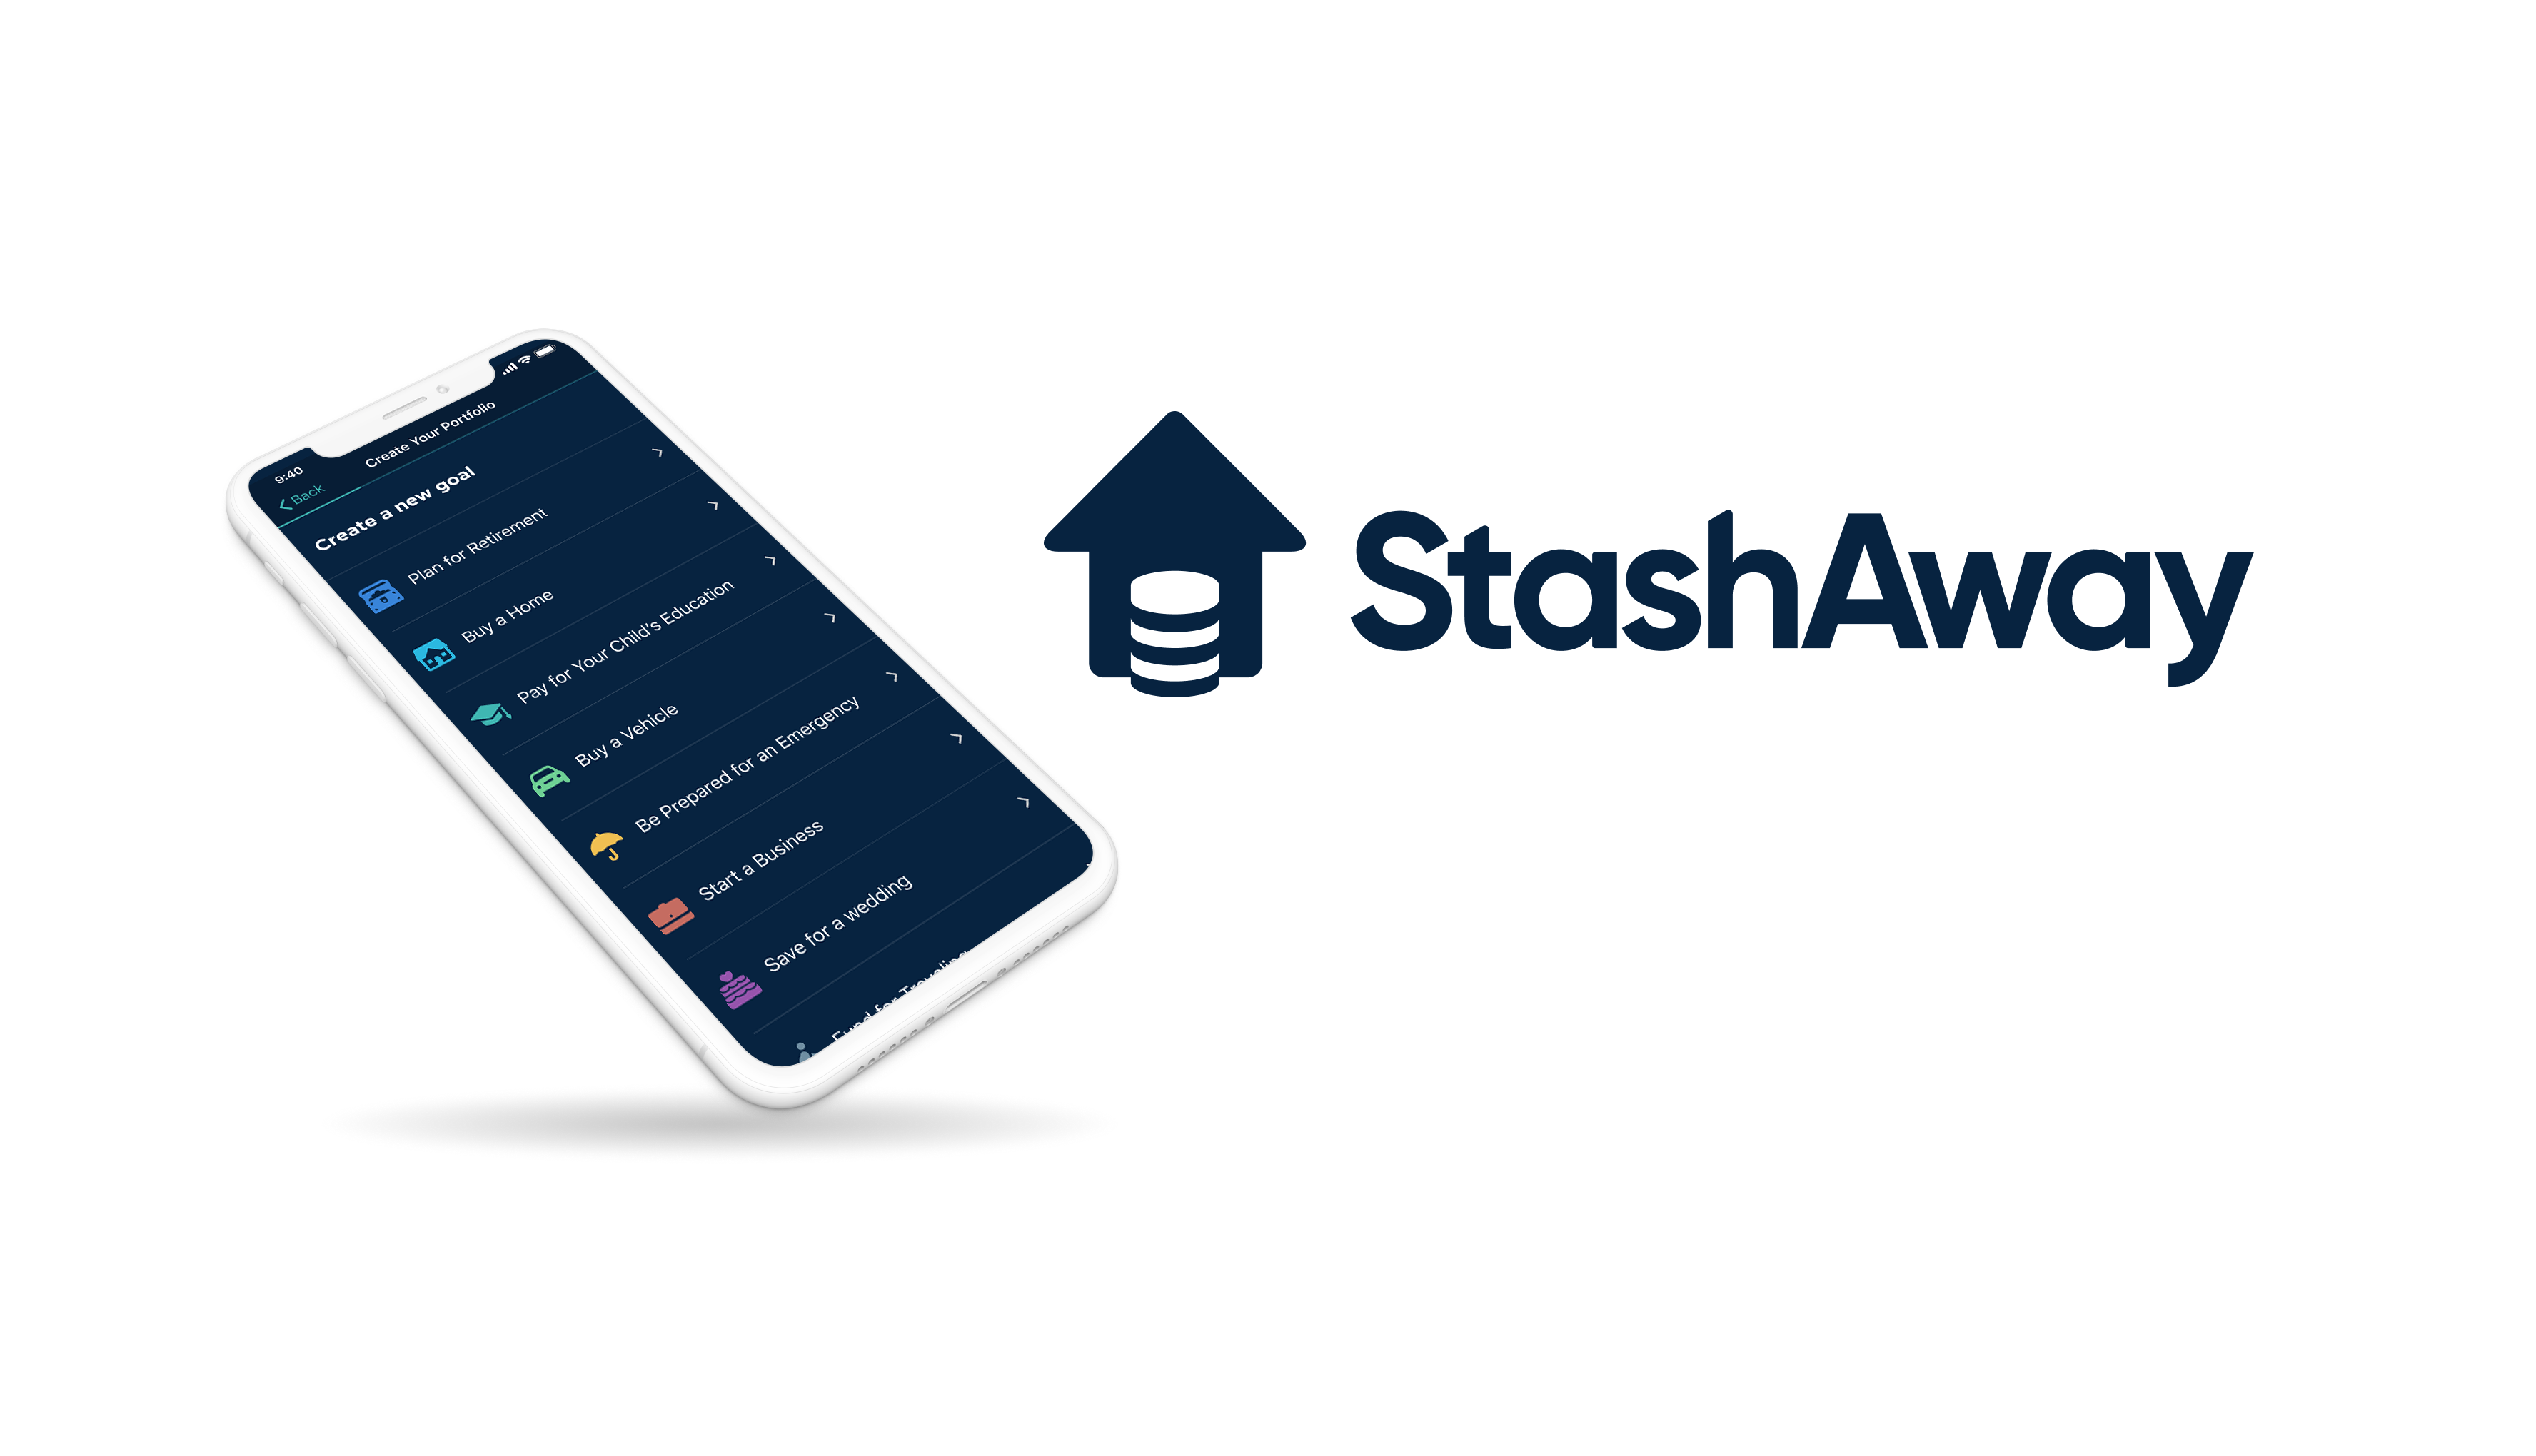 StashAway is one of the best investment apps in SA